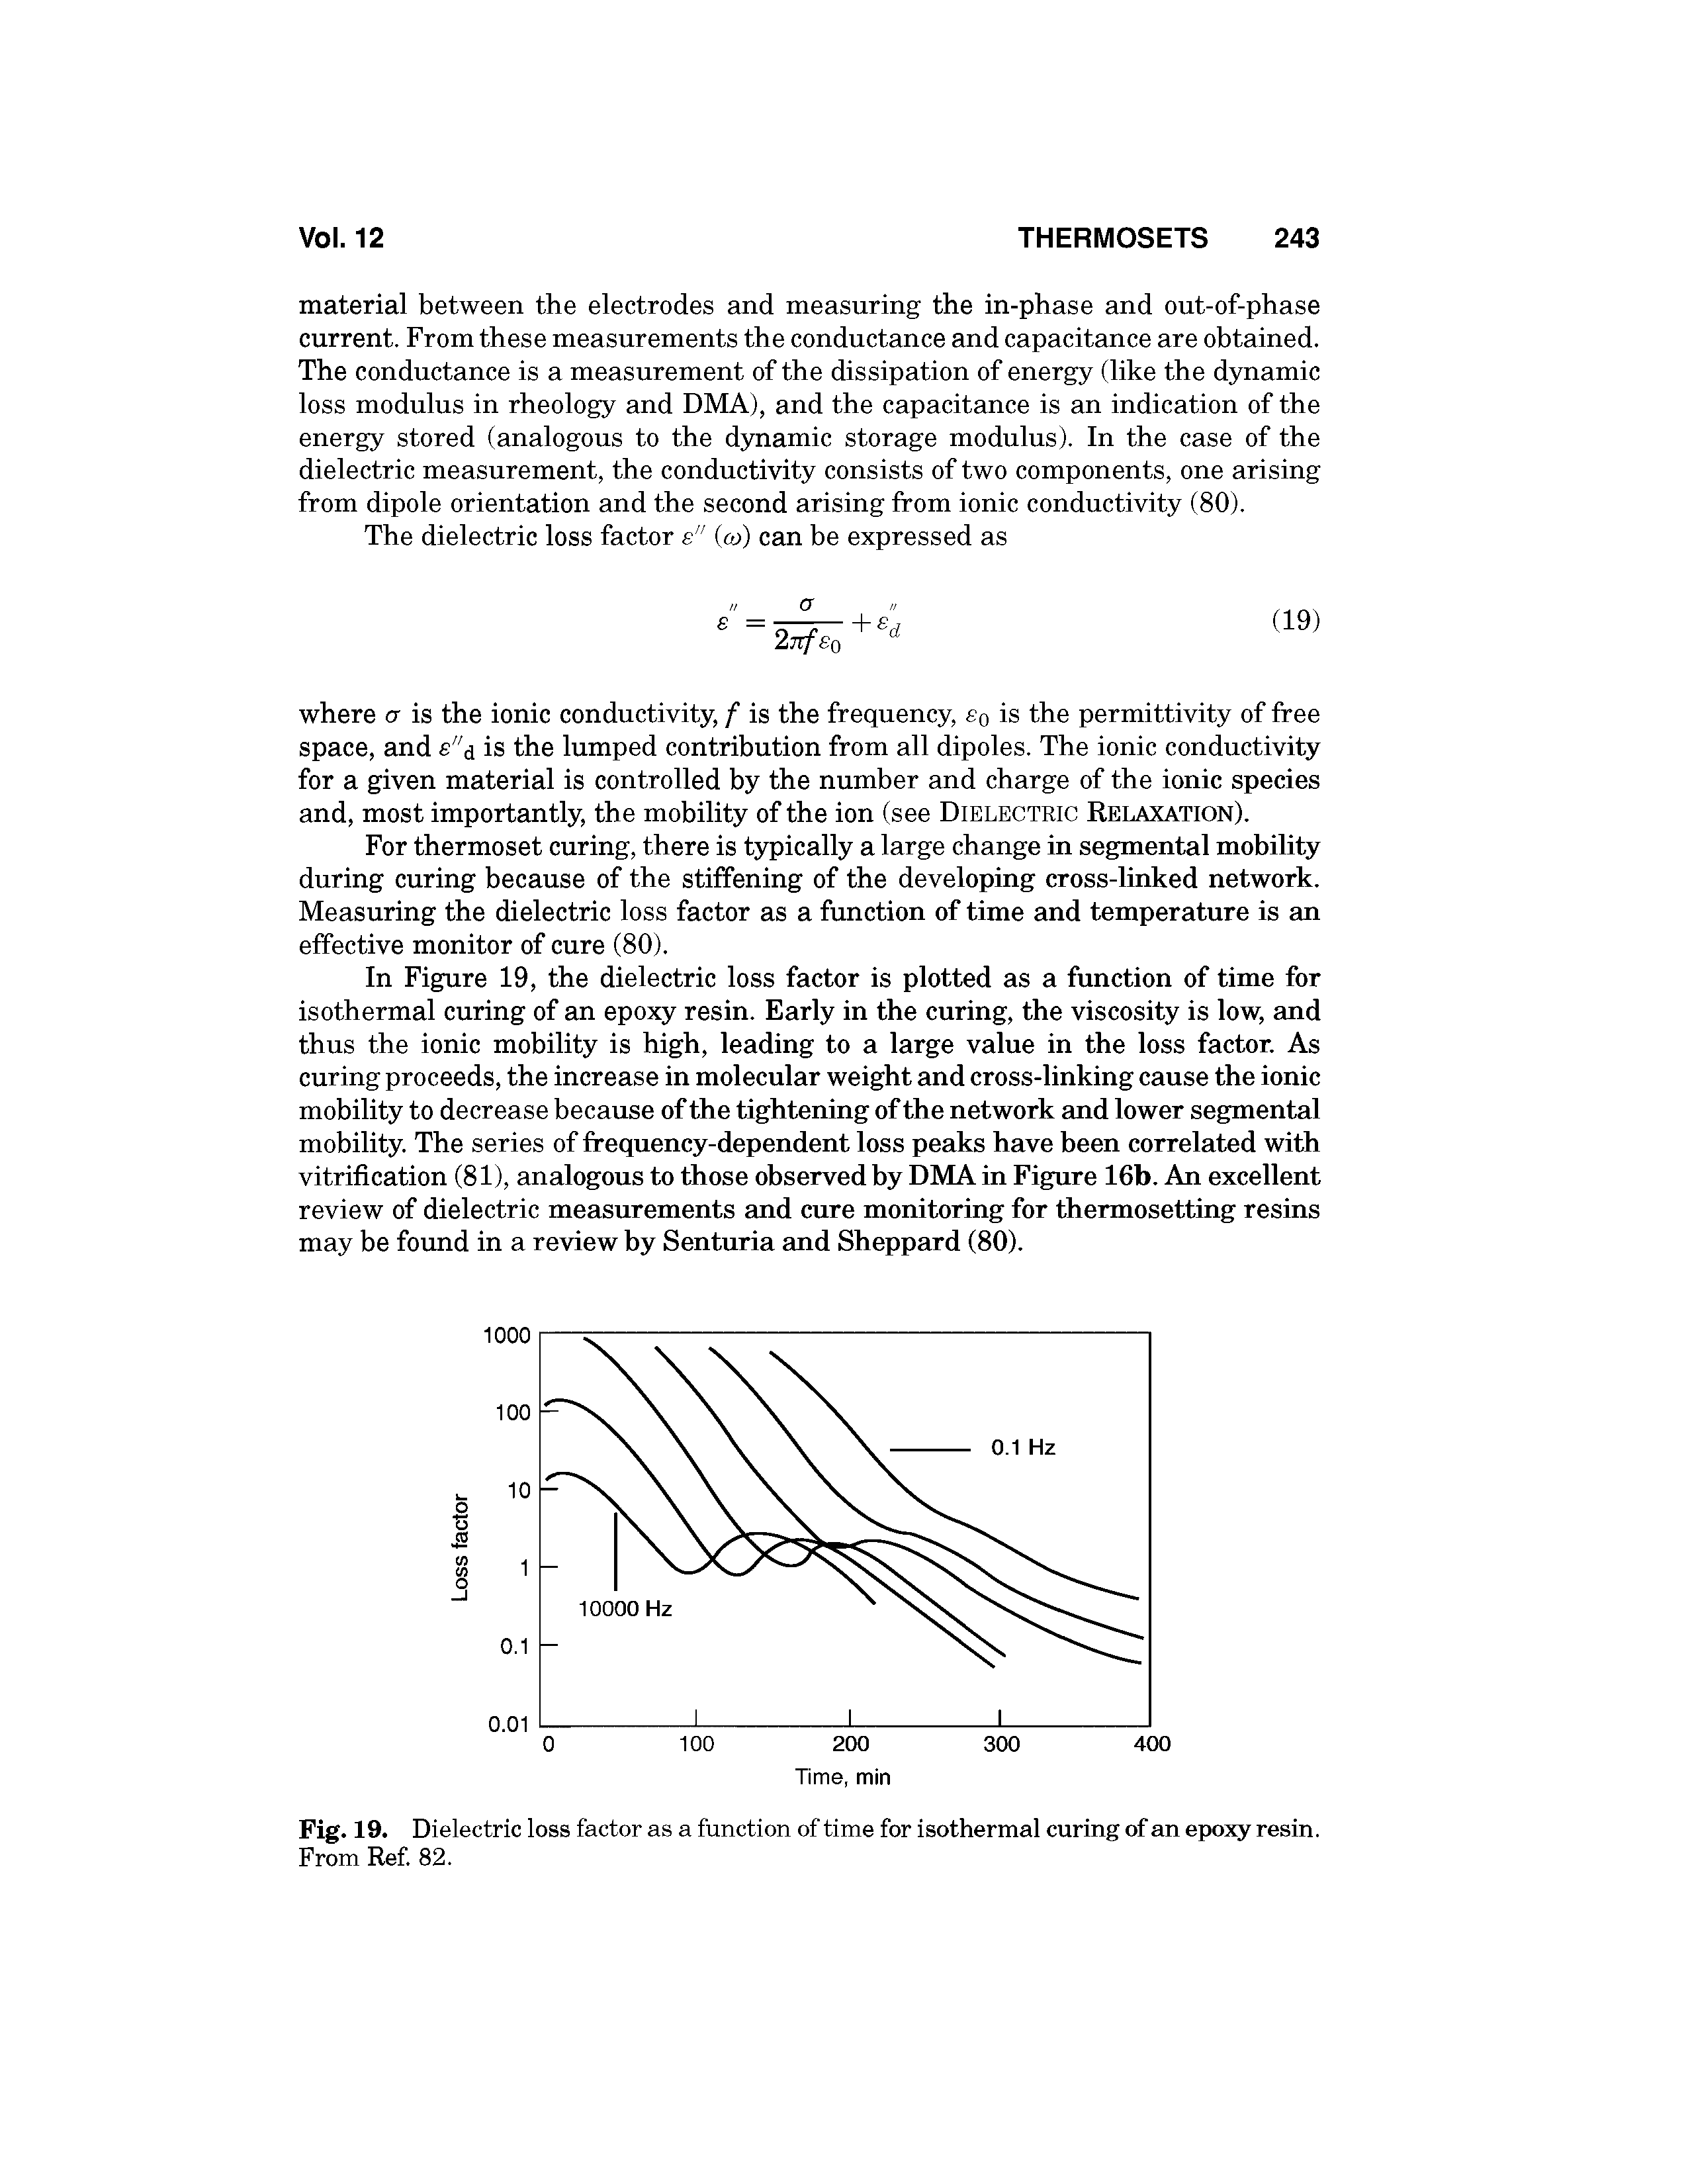 Fig. 19. Dielectric loss factor as a function of time for isothermal curing of an epoxy resin. From Ref. 82.